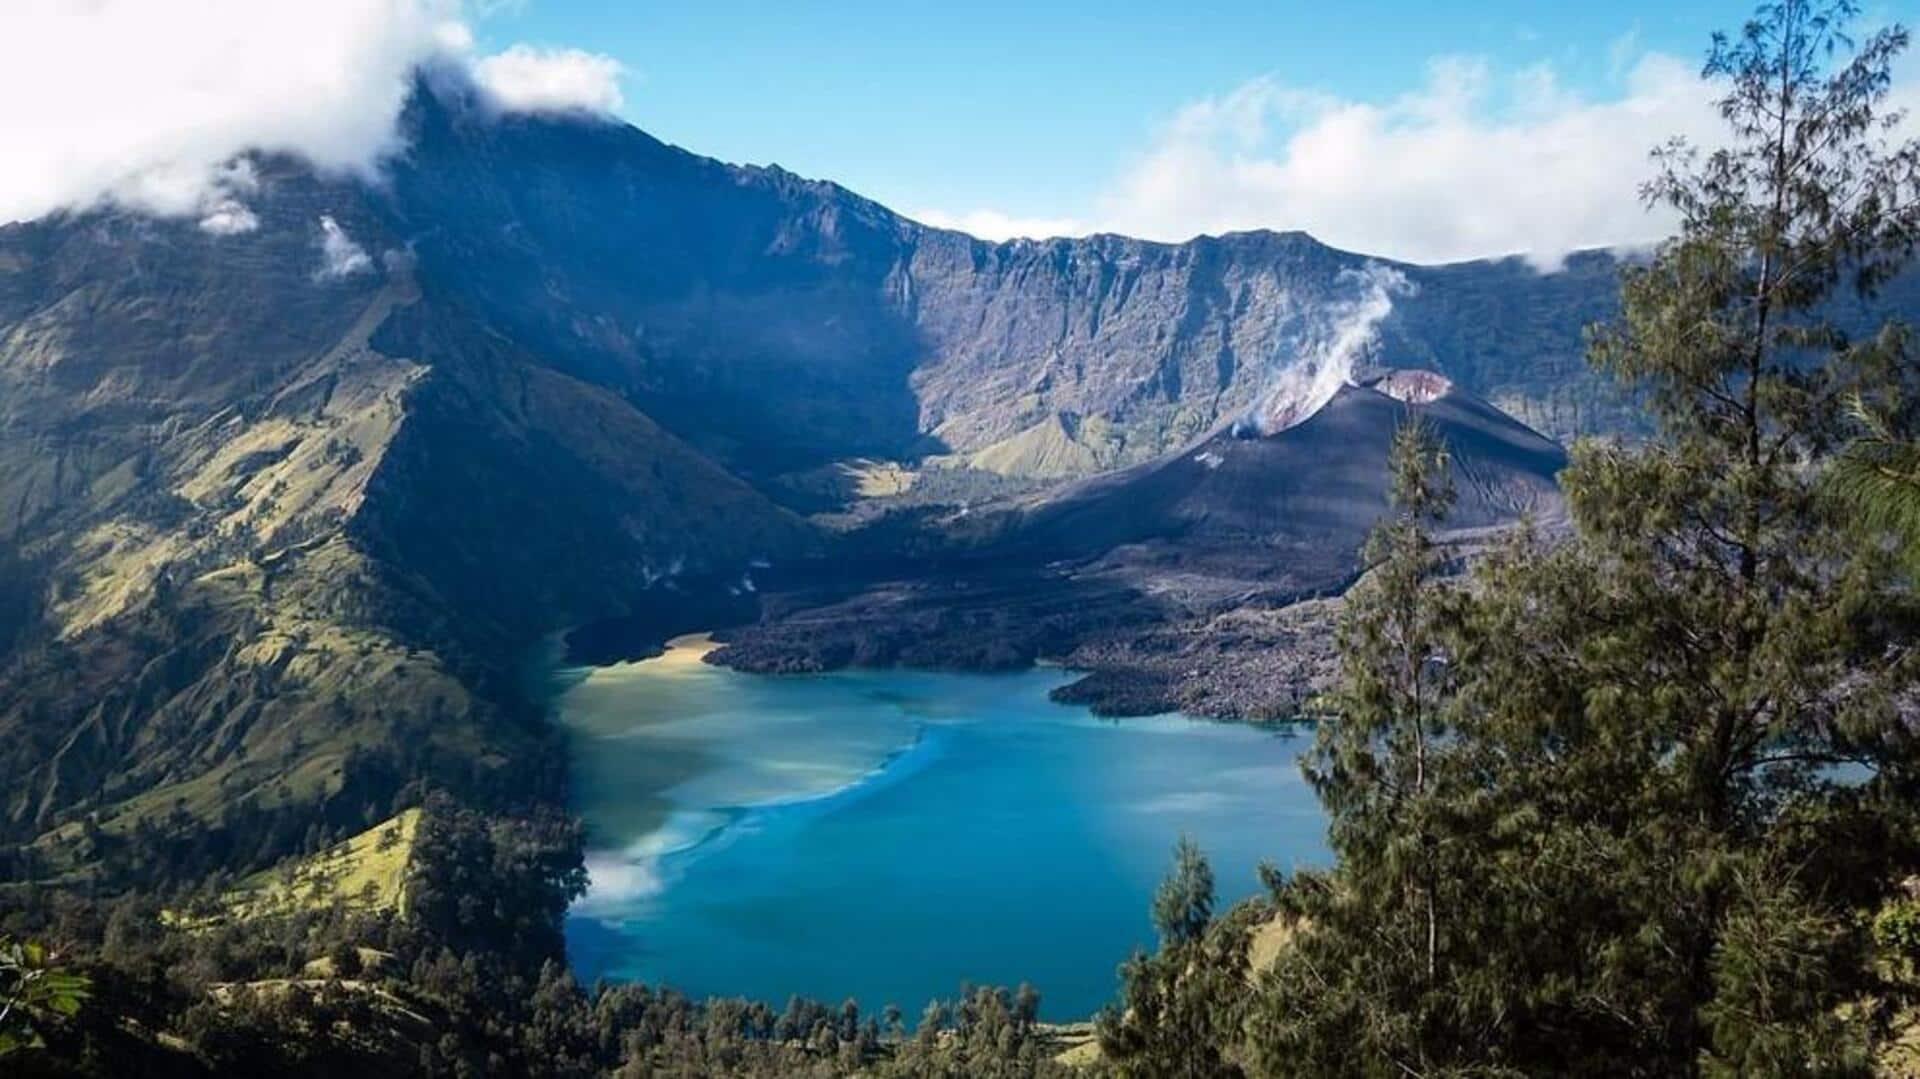 Conquer the majestic Mount Rinjani in Lombok, Indonesia